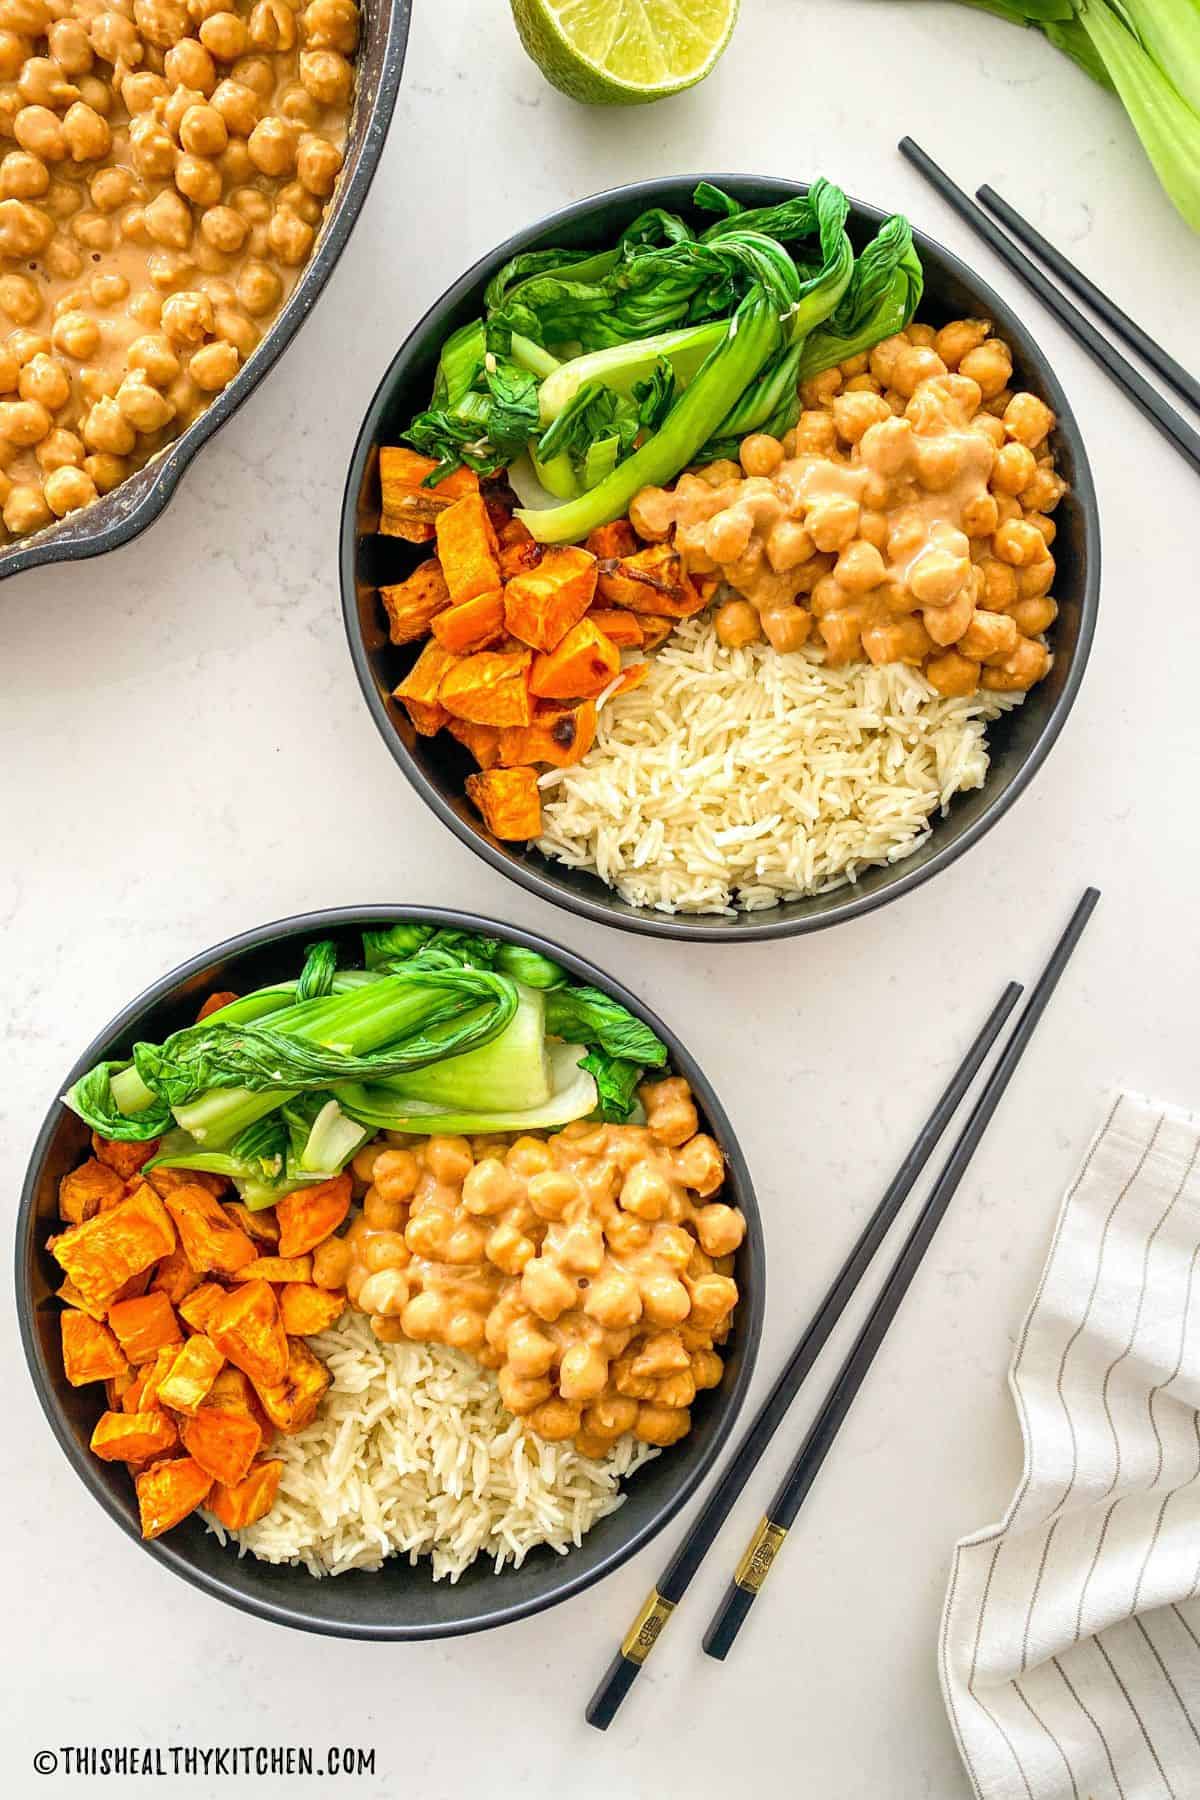 Two Asian buddha bowls with chickpeas, rice, bok choy and sweet potato cubes.